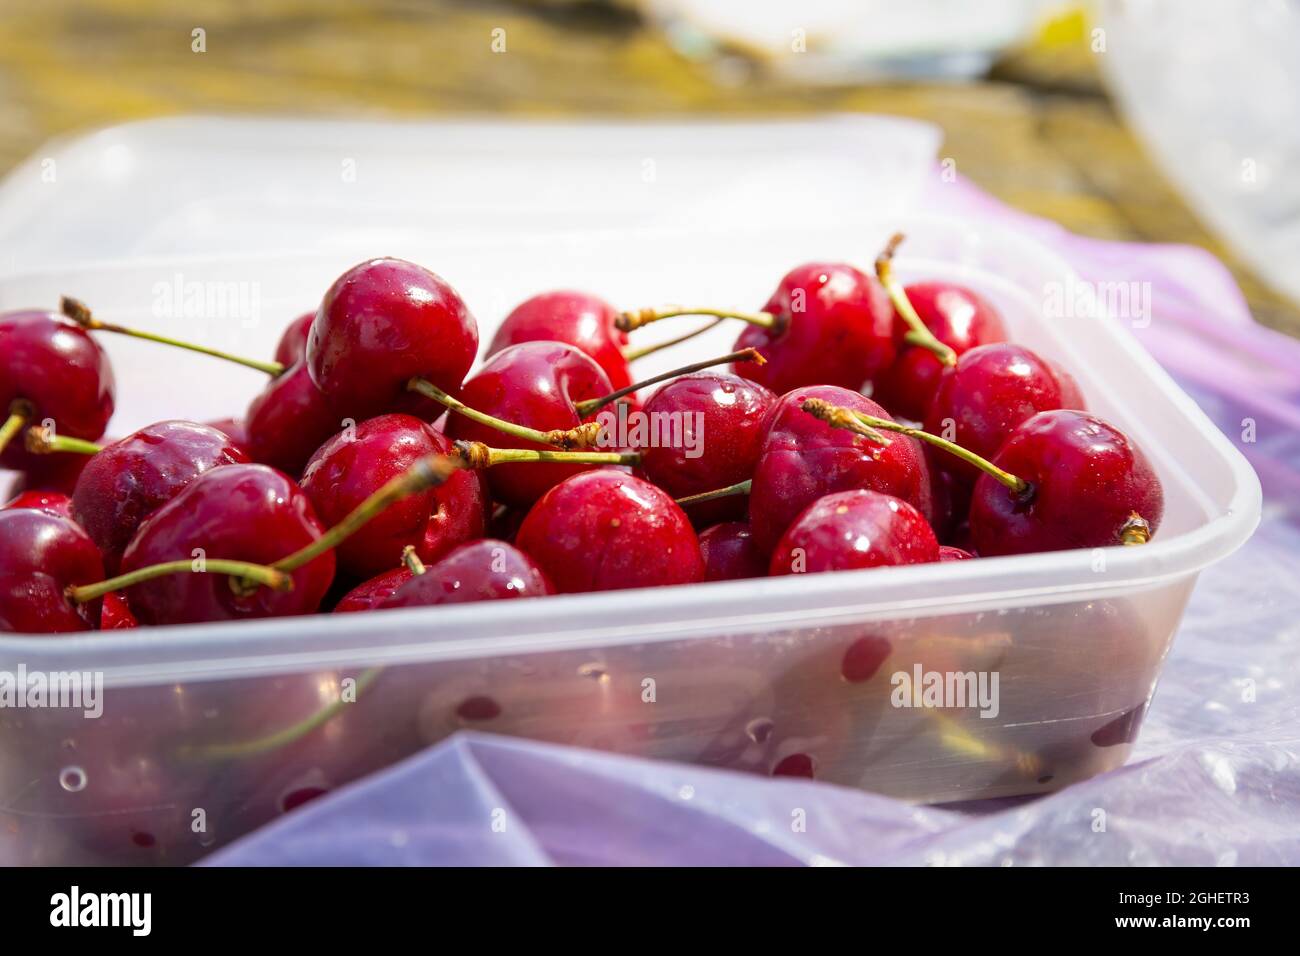 Container full of ripe, red, fresh cherries, freshly washed. Stock Photo